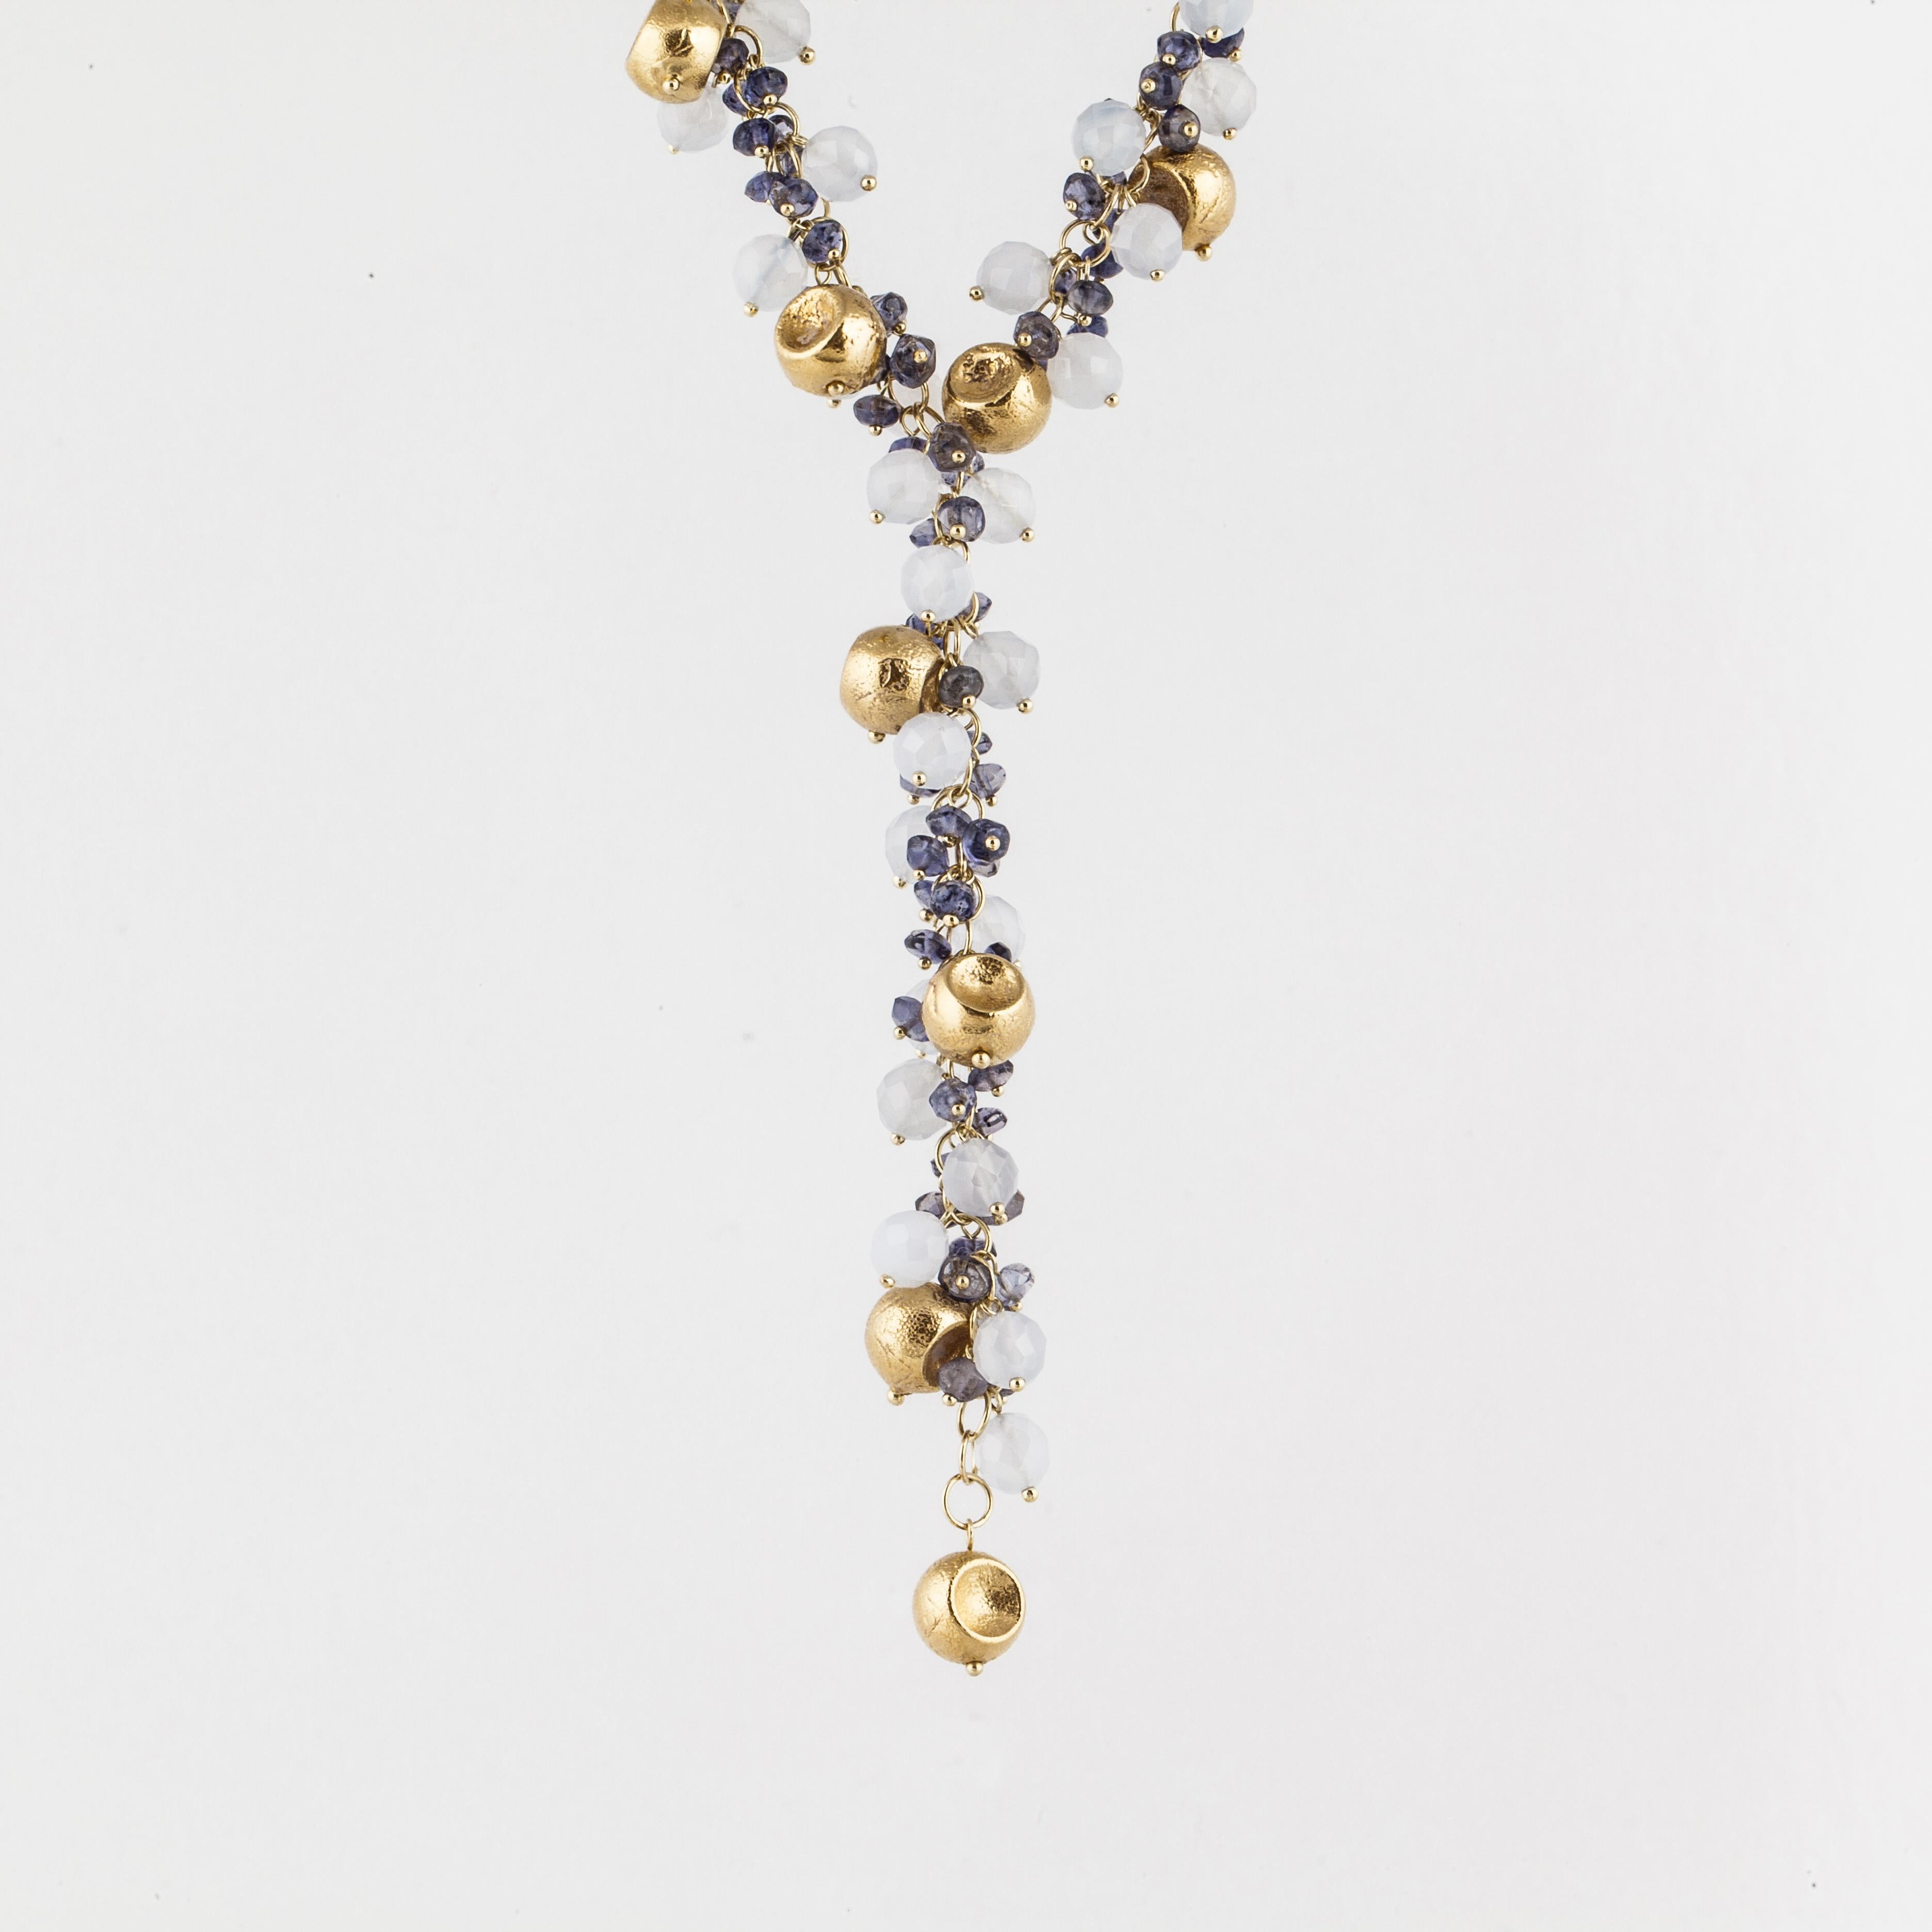 Vintage lariat style 18K yellow gold necklace with gold, sapphire and moonstone beads.  The yellow textured gold beads are concave on two sides.  There are 39 faceted moonstone beads and 90 sapphire beads.  The necklace measures 18 inches long and